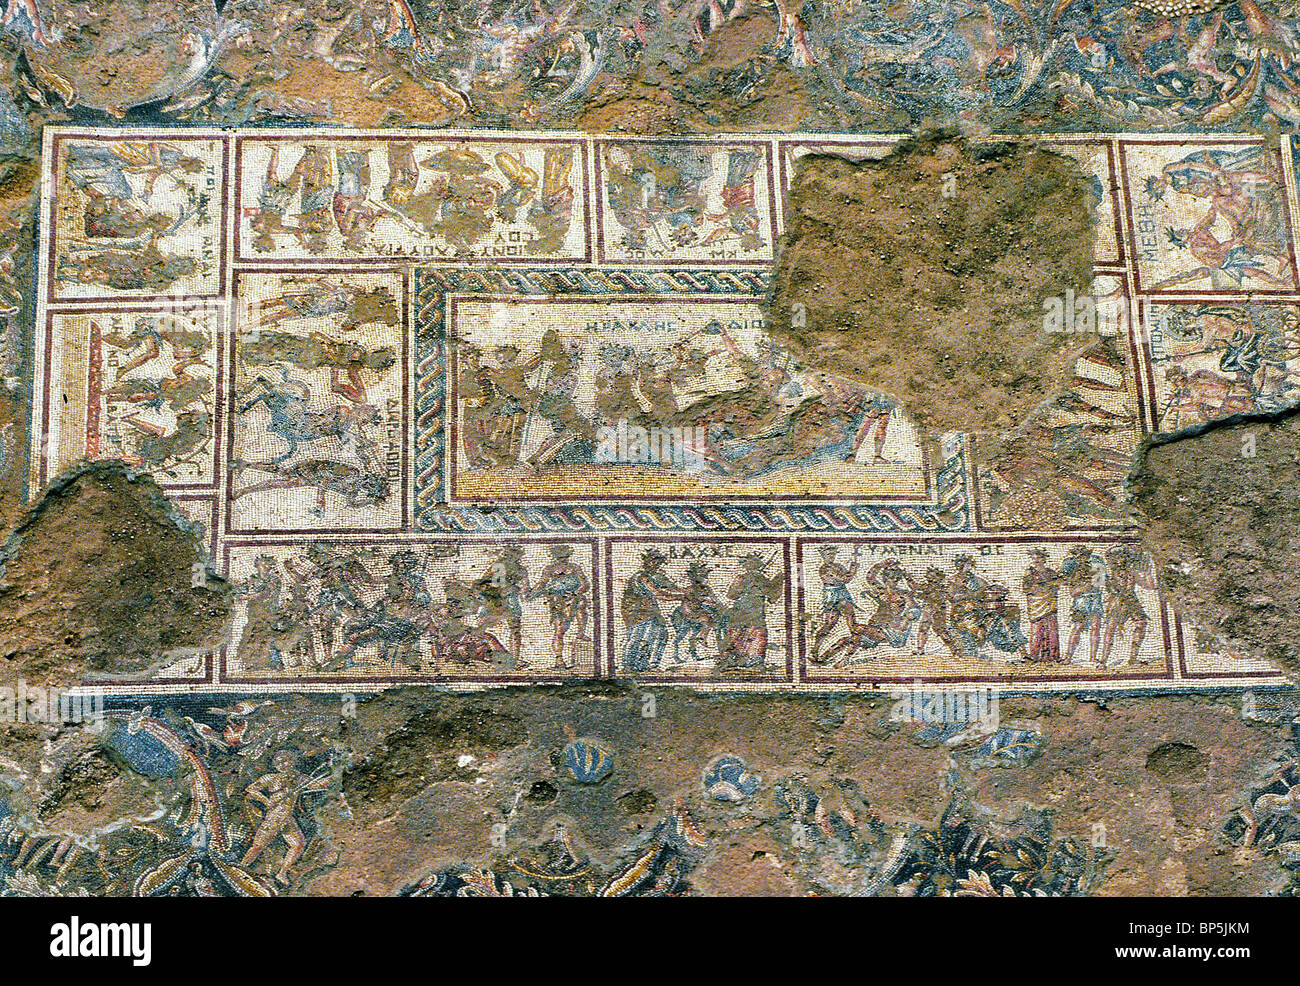 4048. SEPPHORIS - DETAIL OF A MOZAIC FLOOR FROM A LATE ROMAN (5TH. C. AD) HOUSE DEPICTING MYTHOLOGICAL SCENES Stock Photo